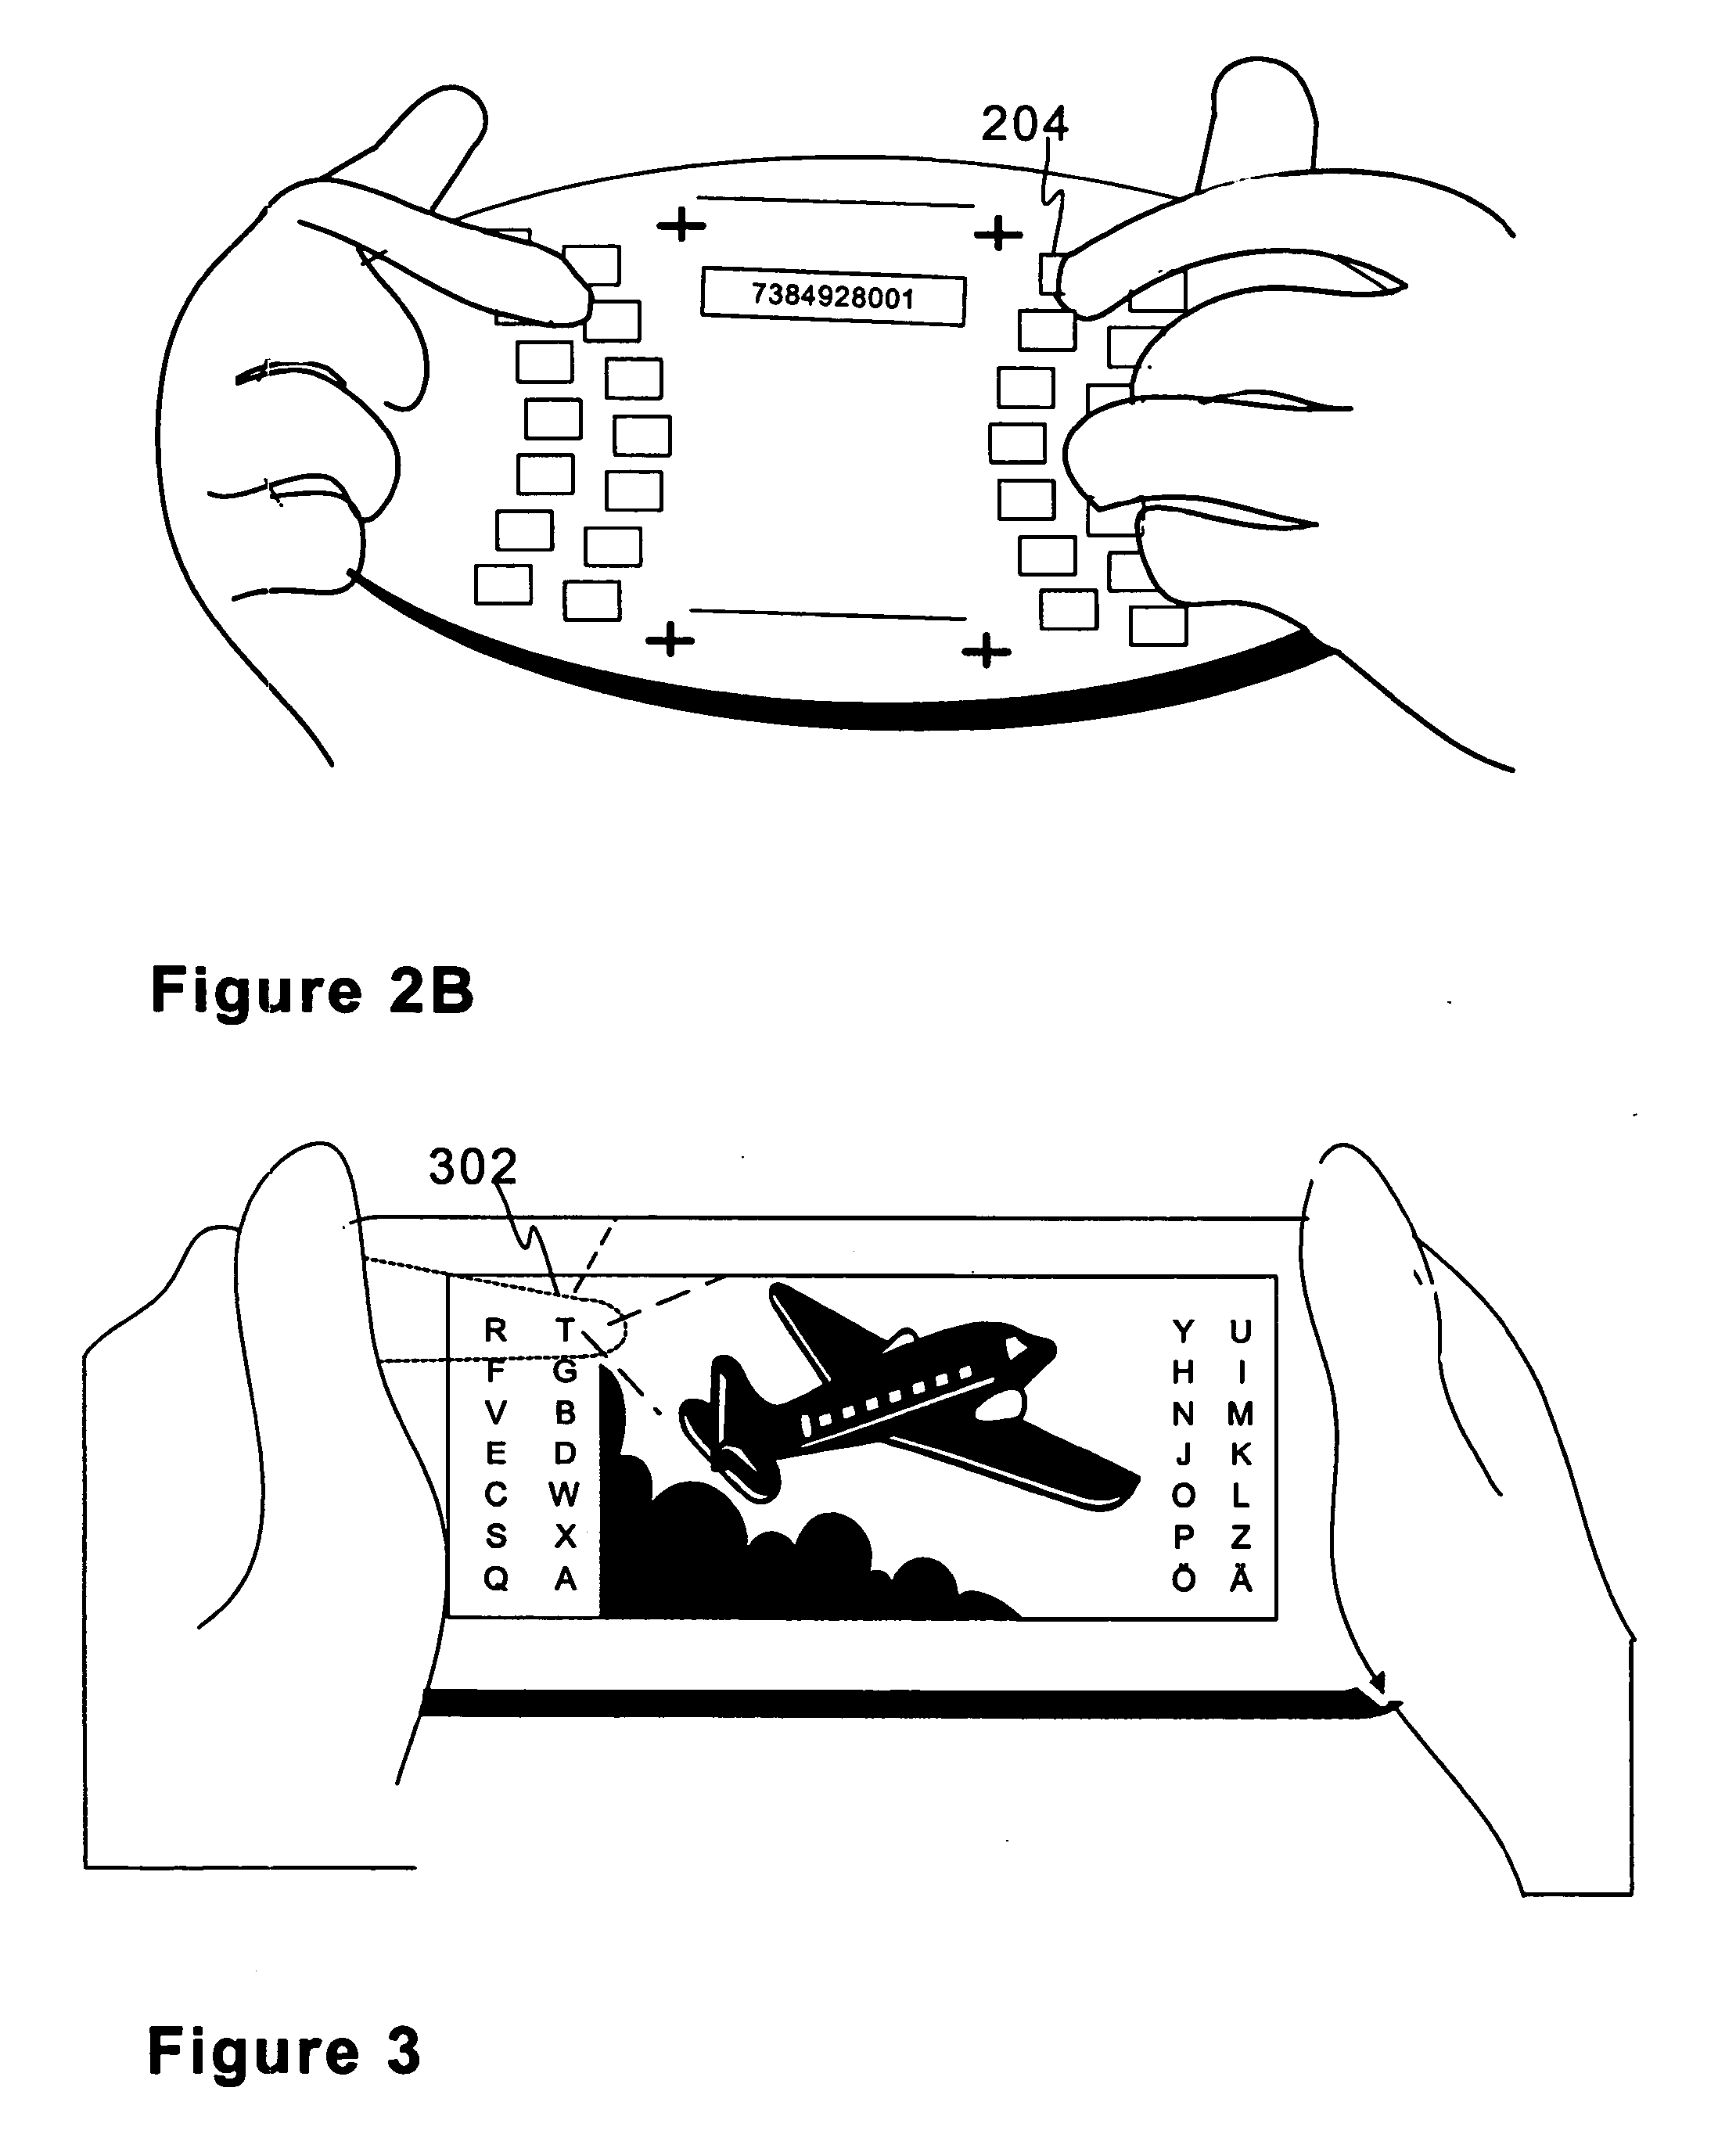 Electronic hand-held device with a back cover keypad and a related method